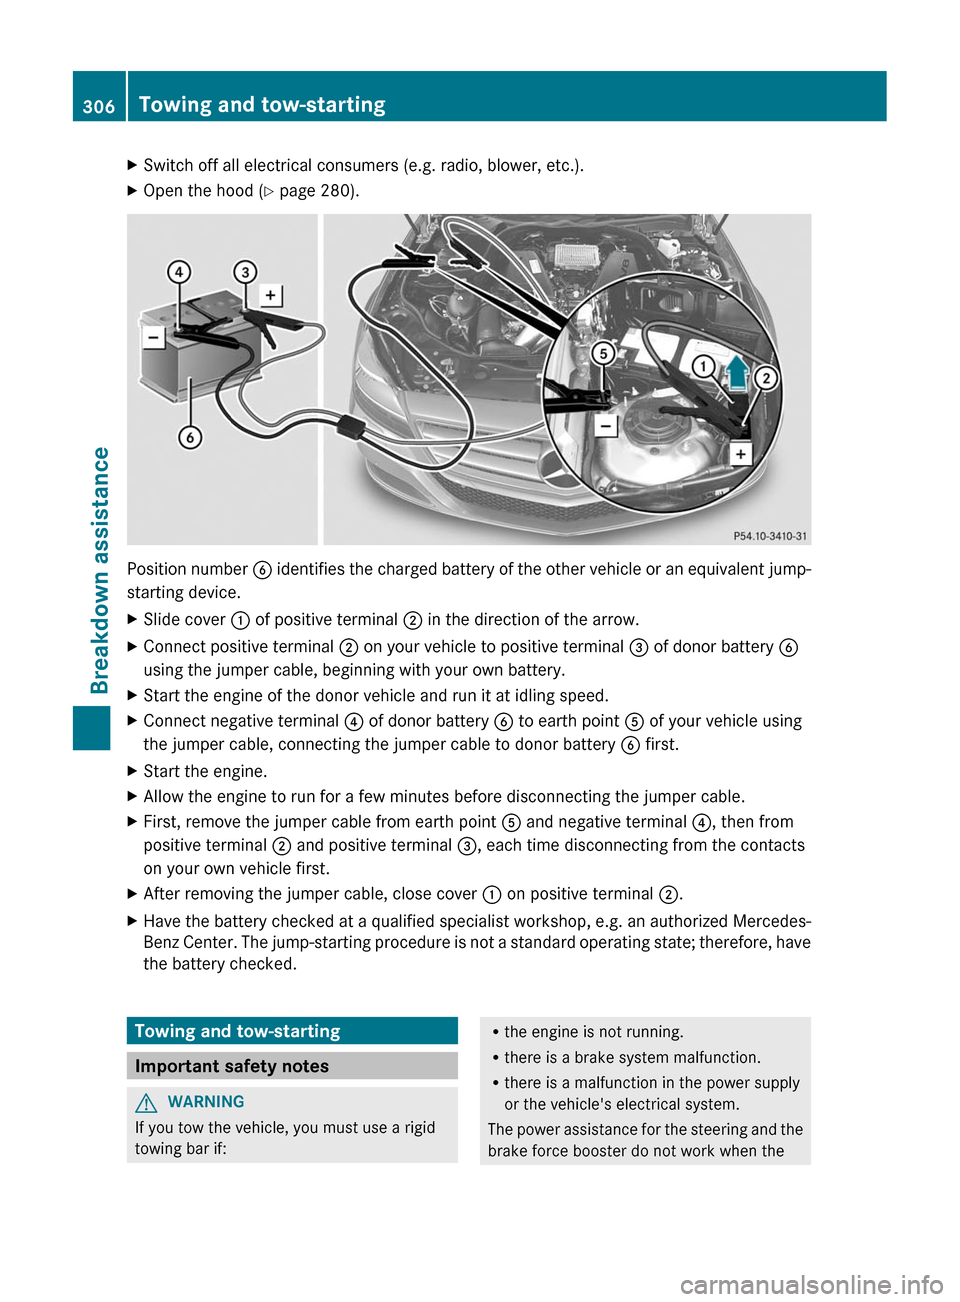 MERCEDES-BENZ CLS-Class 2012 W218 Owners Manual XSwitch off all electrical consumers (e.g. radio, blower, etc.).XOpen the hood (Y page 280).
Position number  B identifies the charged battery of the other vehicle or an equivalent jump-
starting devi